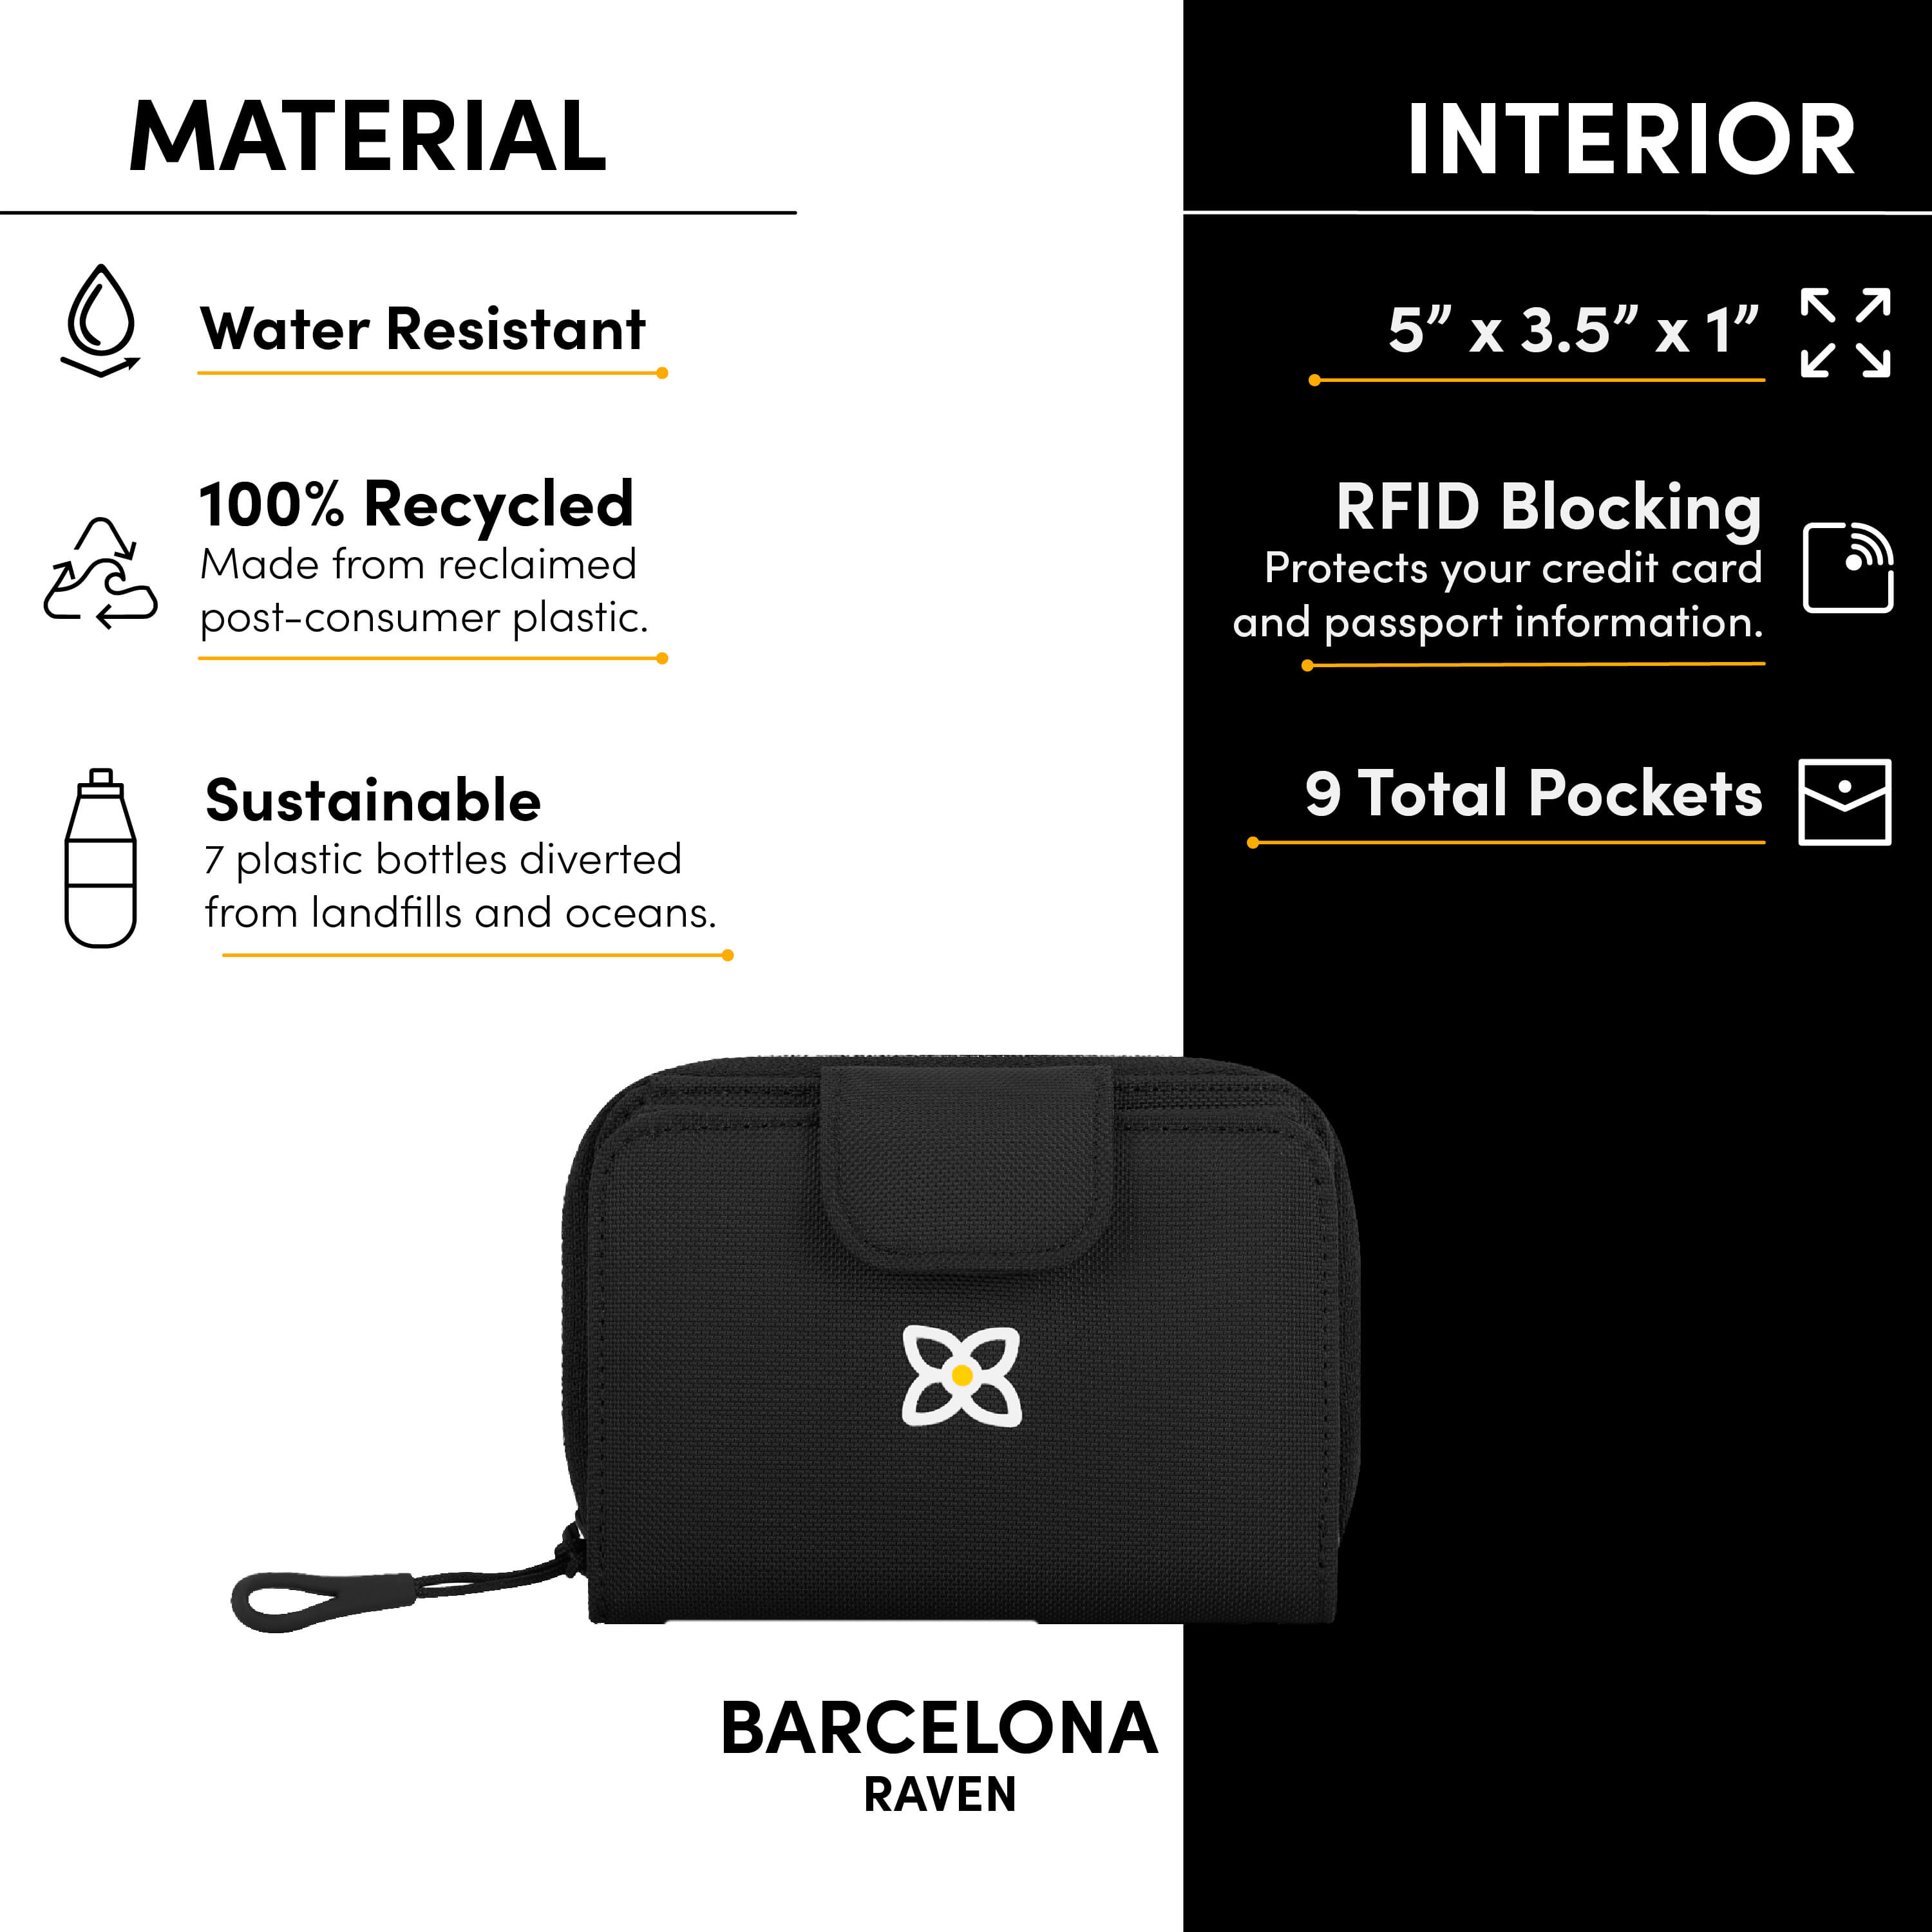 Graphic showcasing the following features of Sherpani women's RFID wallet, the Barcelona: water-resistant material, sustainably made from repurposed plastic bottles, built-in RFID security, nine total pockets. 